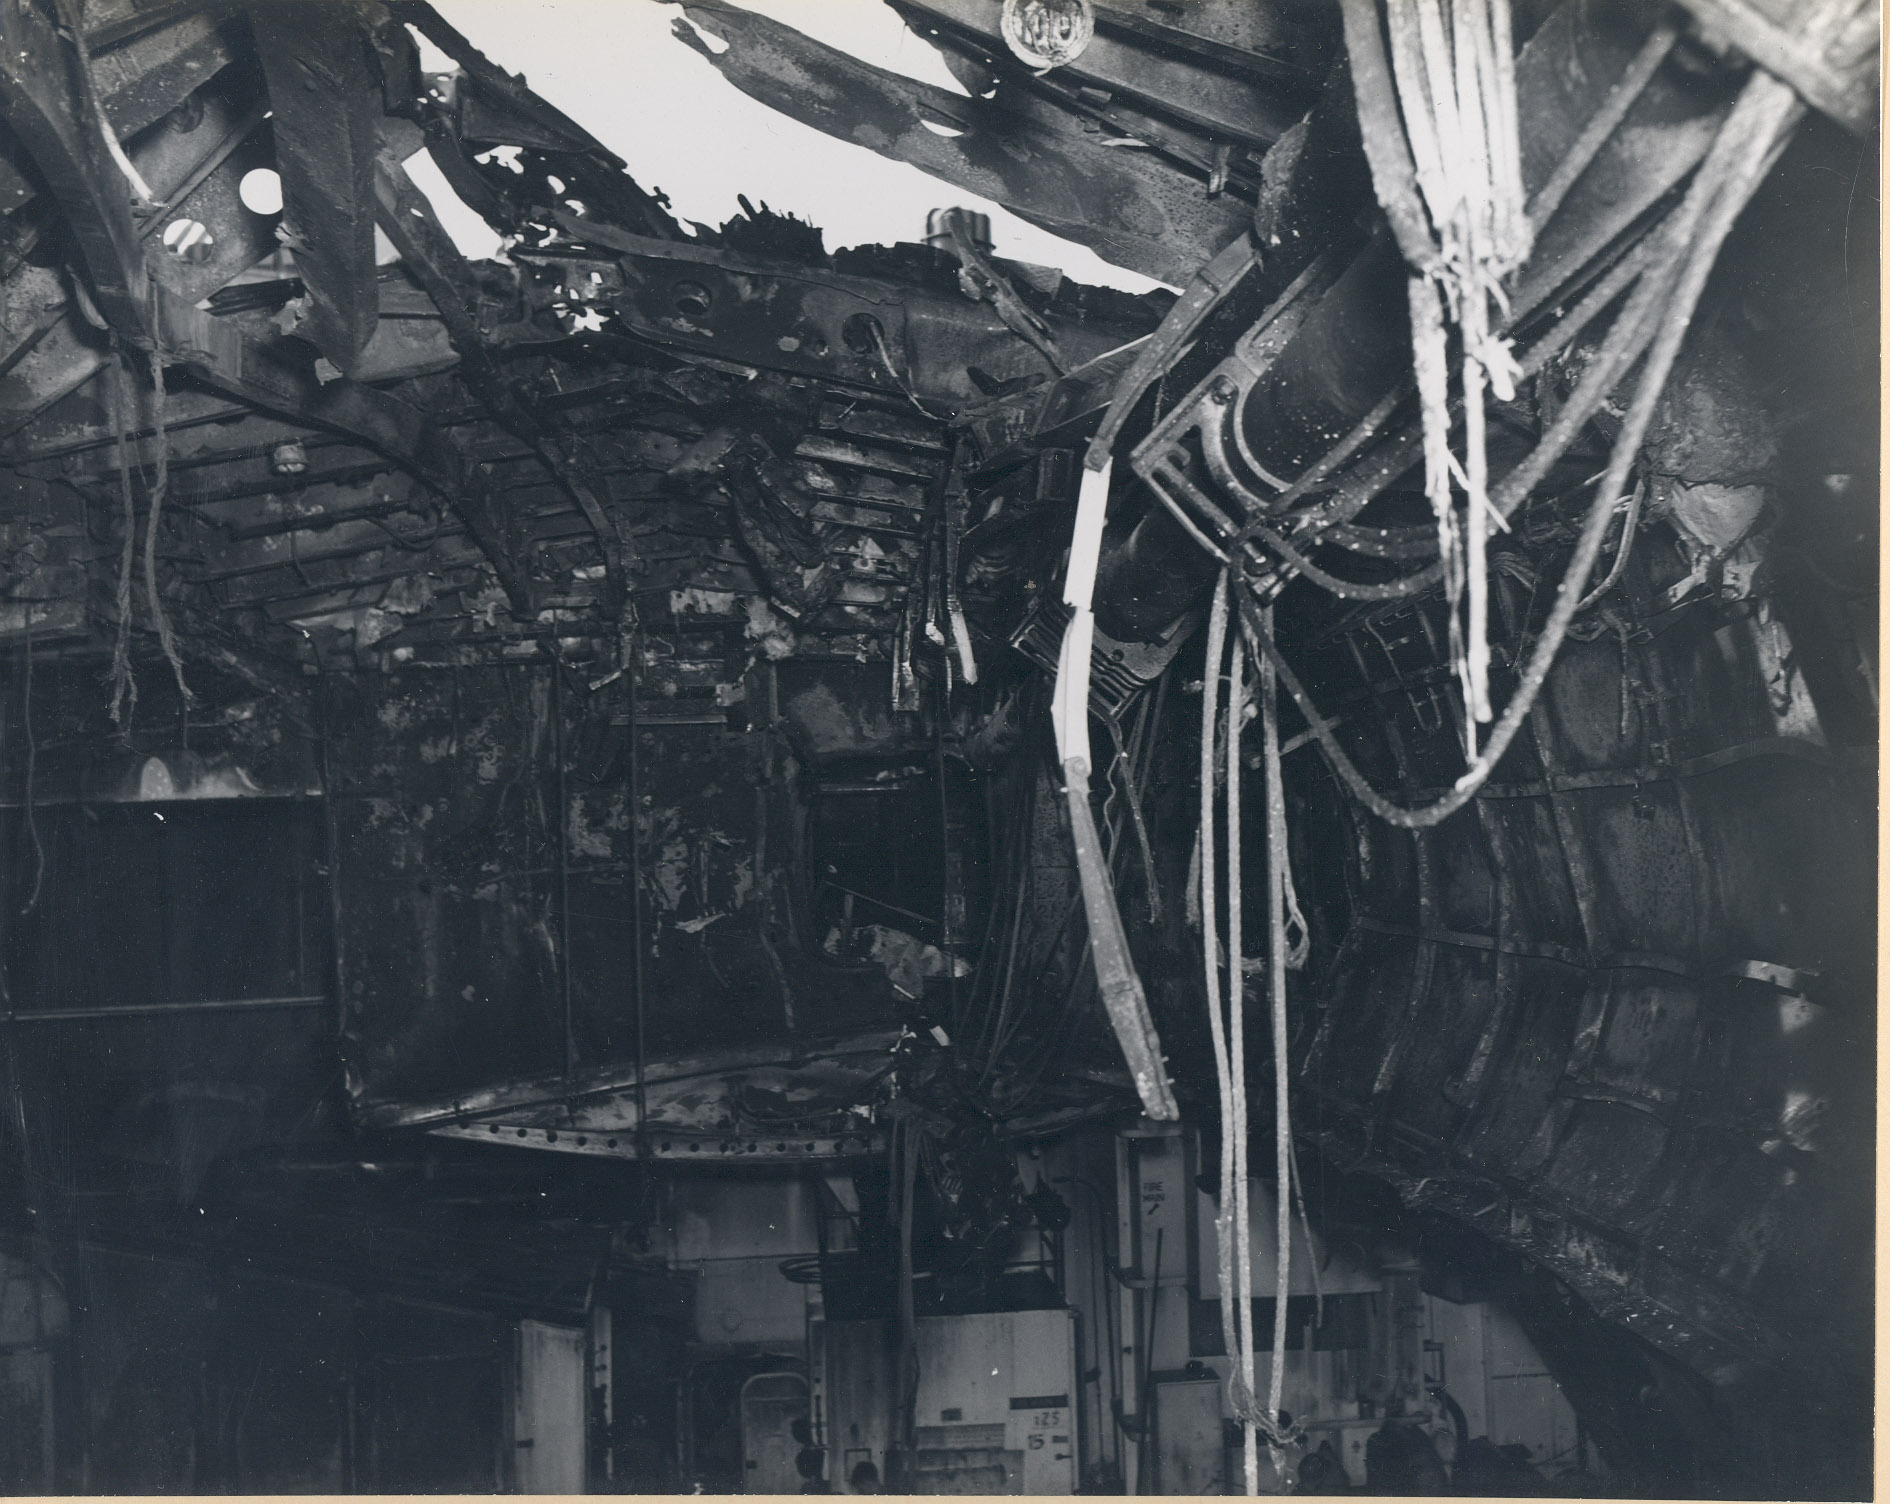 Damage to the flight deck and the hangar deck of USS Intrepid following the crash of a Japanese special attack aircraft off the Philippines, 25 Nov 1944